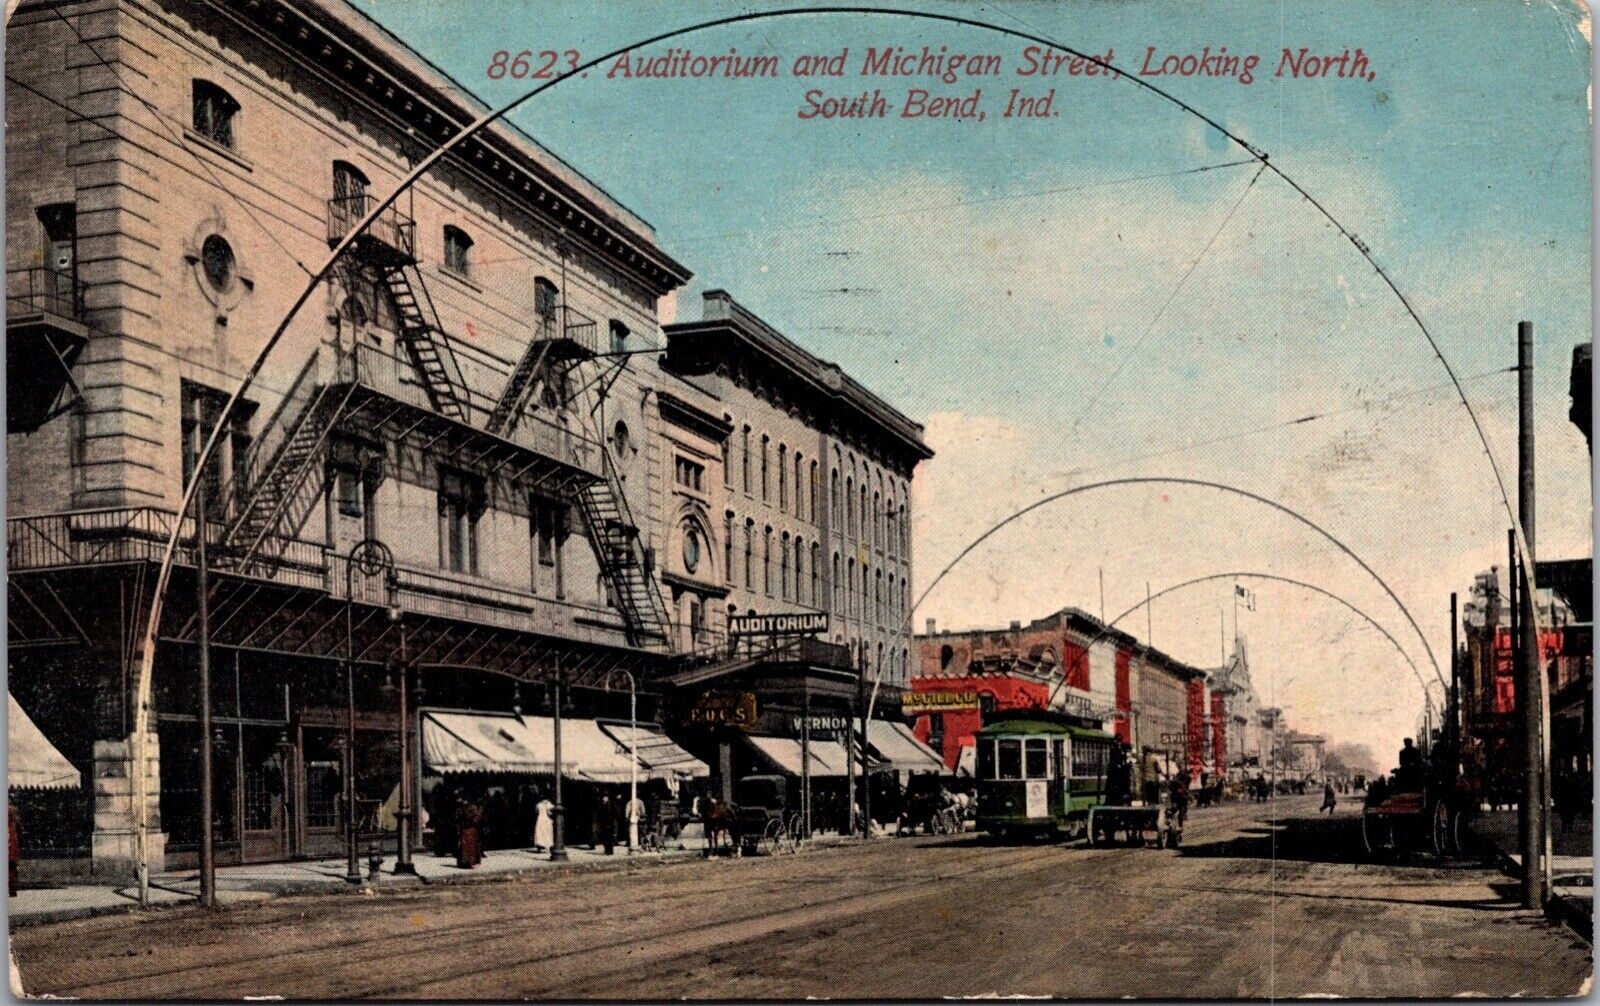 PC Auditorium and Michigan Street, Looking North in South Bend, Indiana~139238